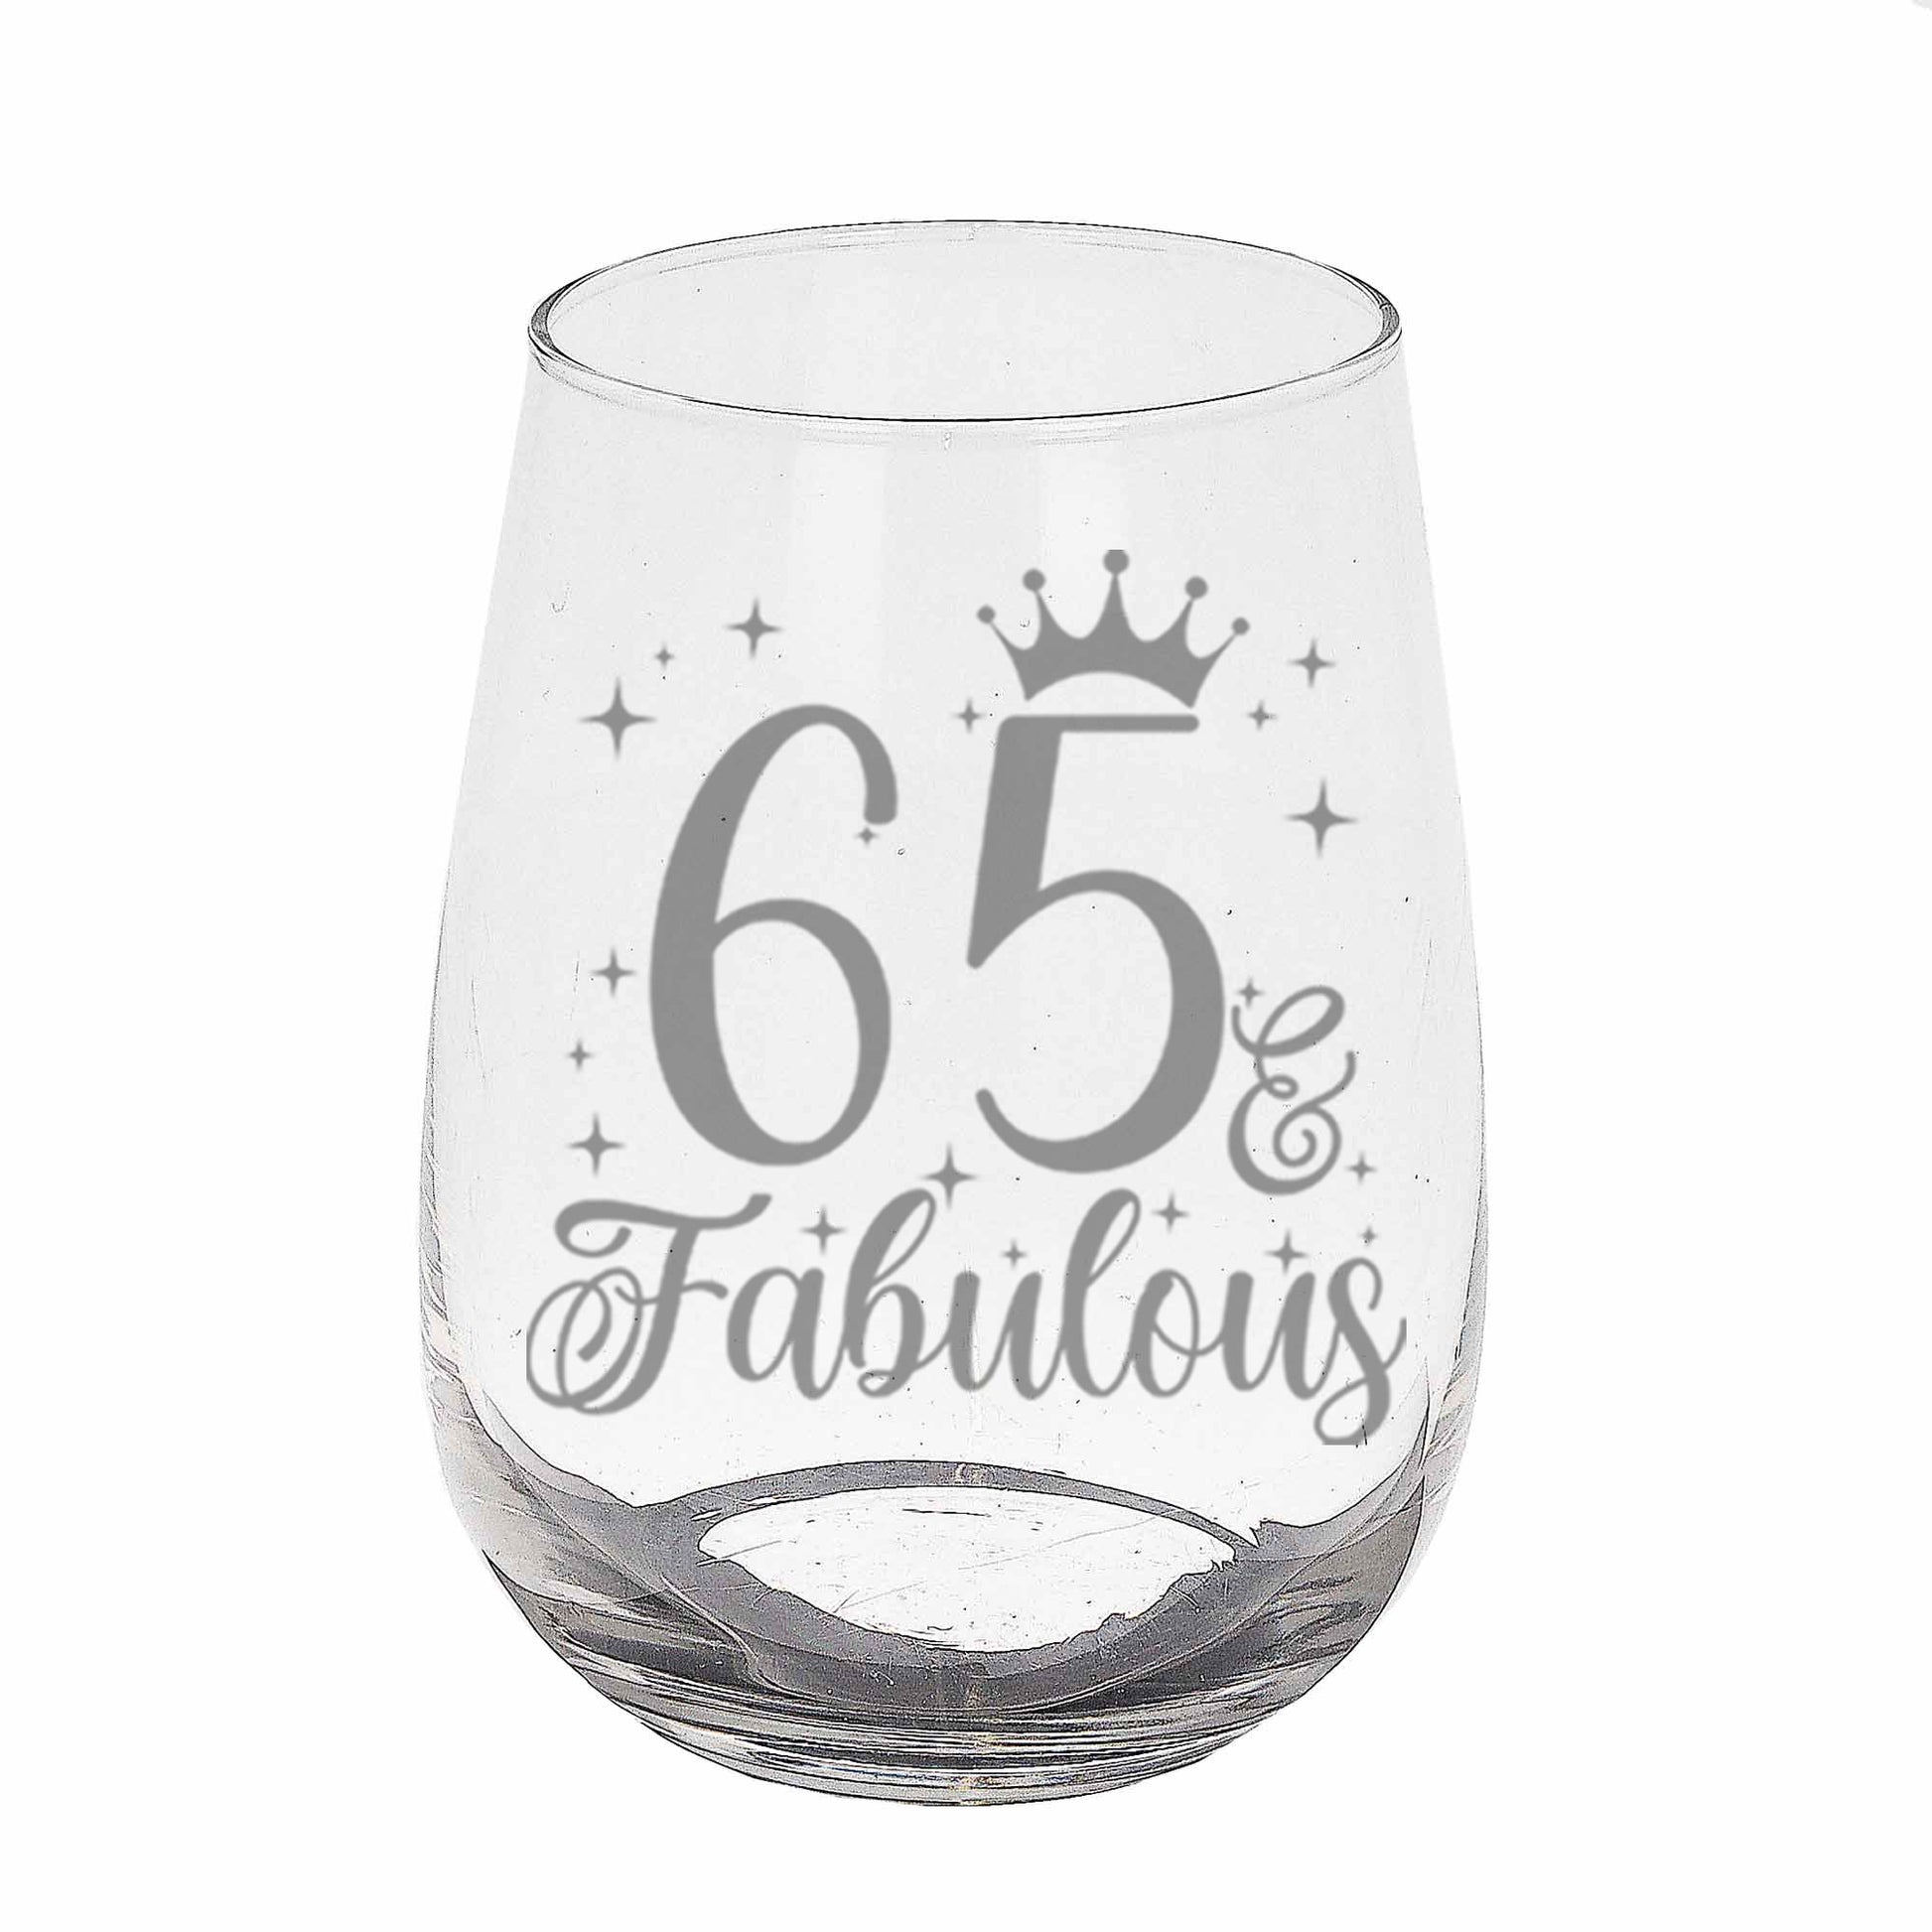 65 & Fabulous Engraved Stemless Gin Glass and/or Coaster Set  - Always Looking Good - Stemless Gin Glass On Its Own  